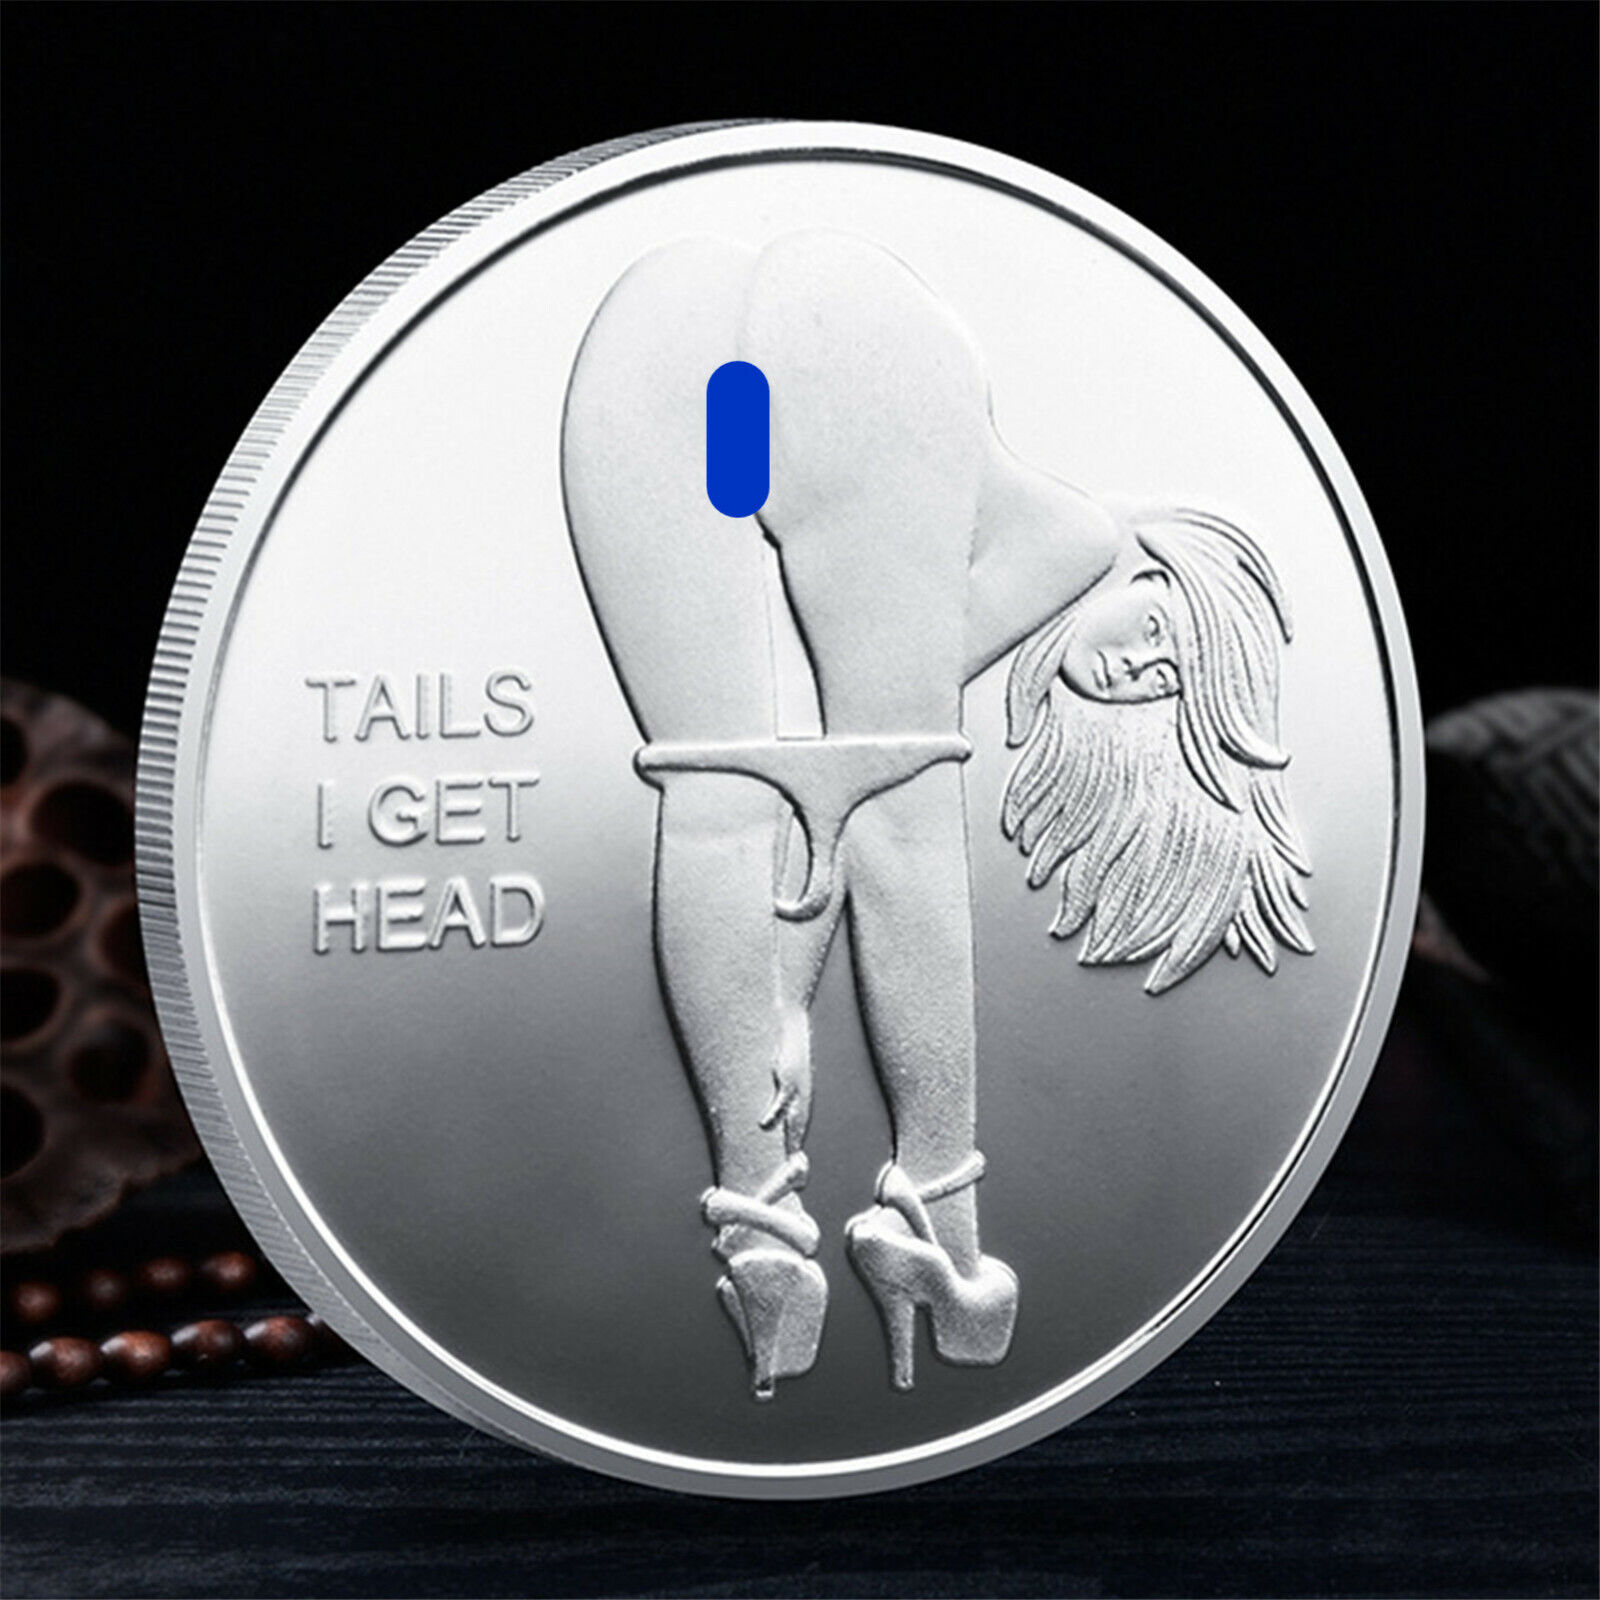 Tails I Get Head  Heads I Get Tail  Sexy Lady Heads Tails Challenge Token Coin